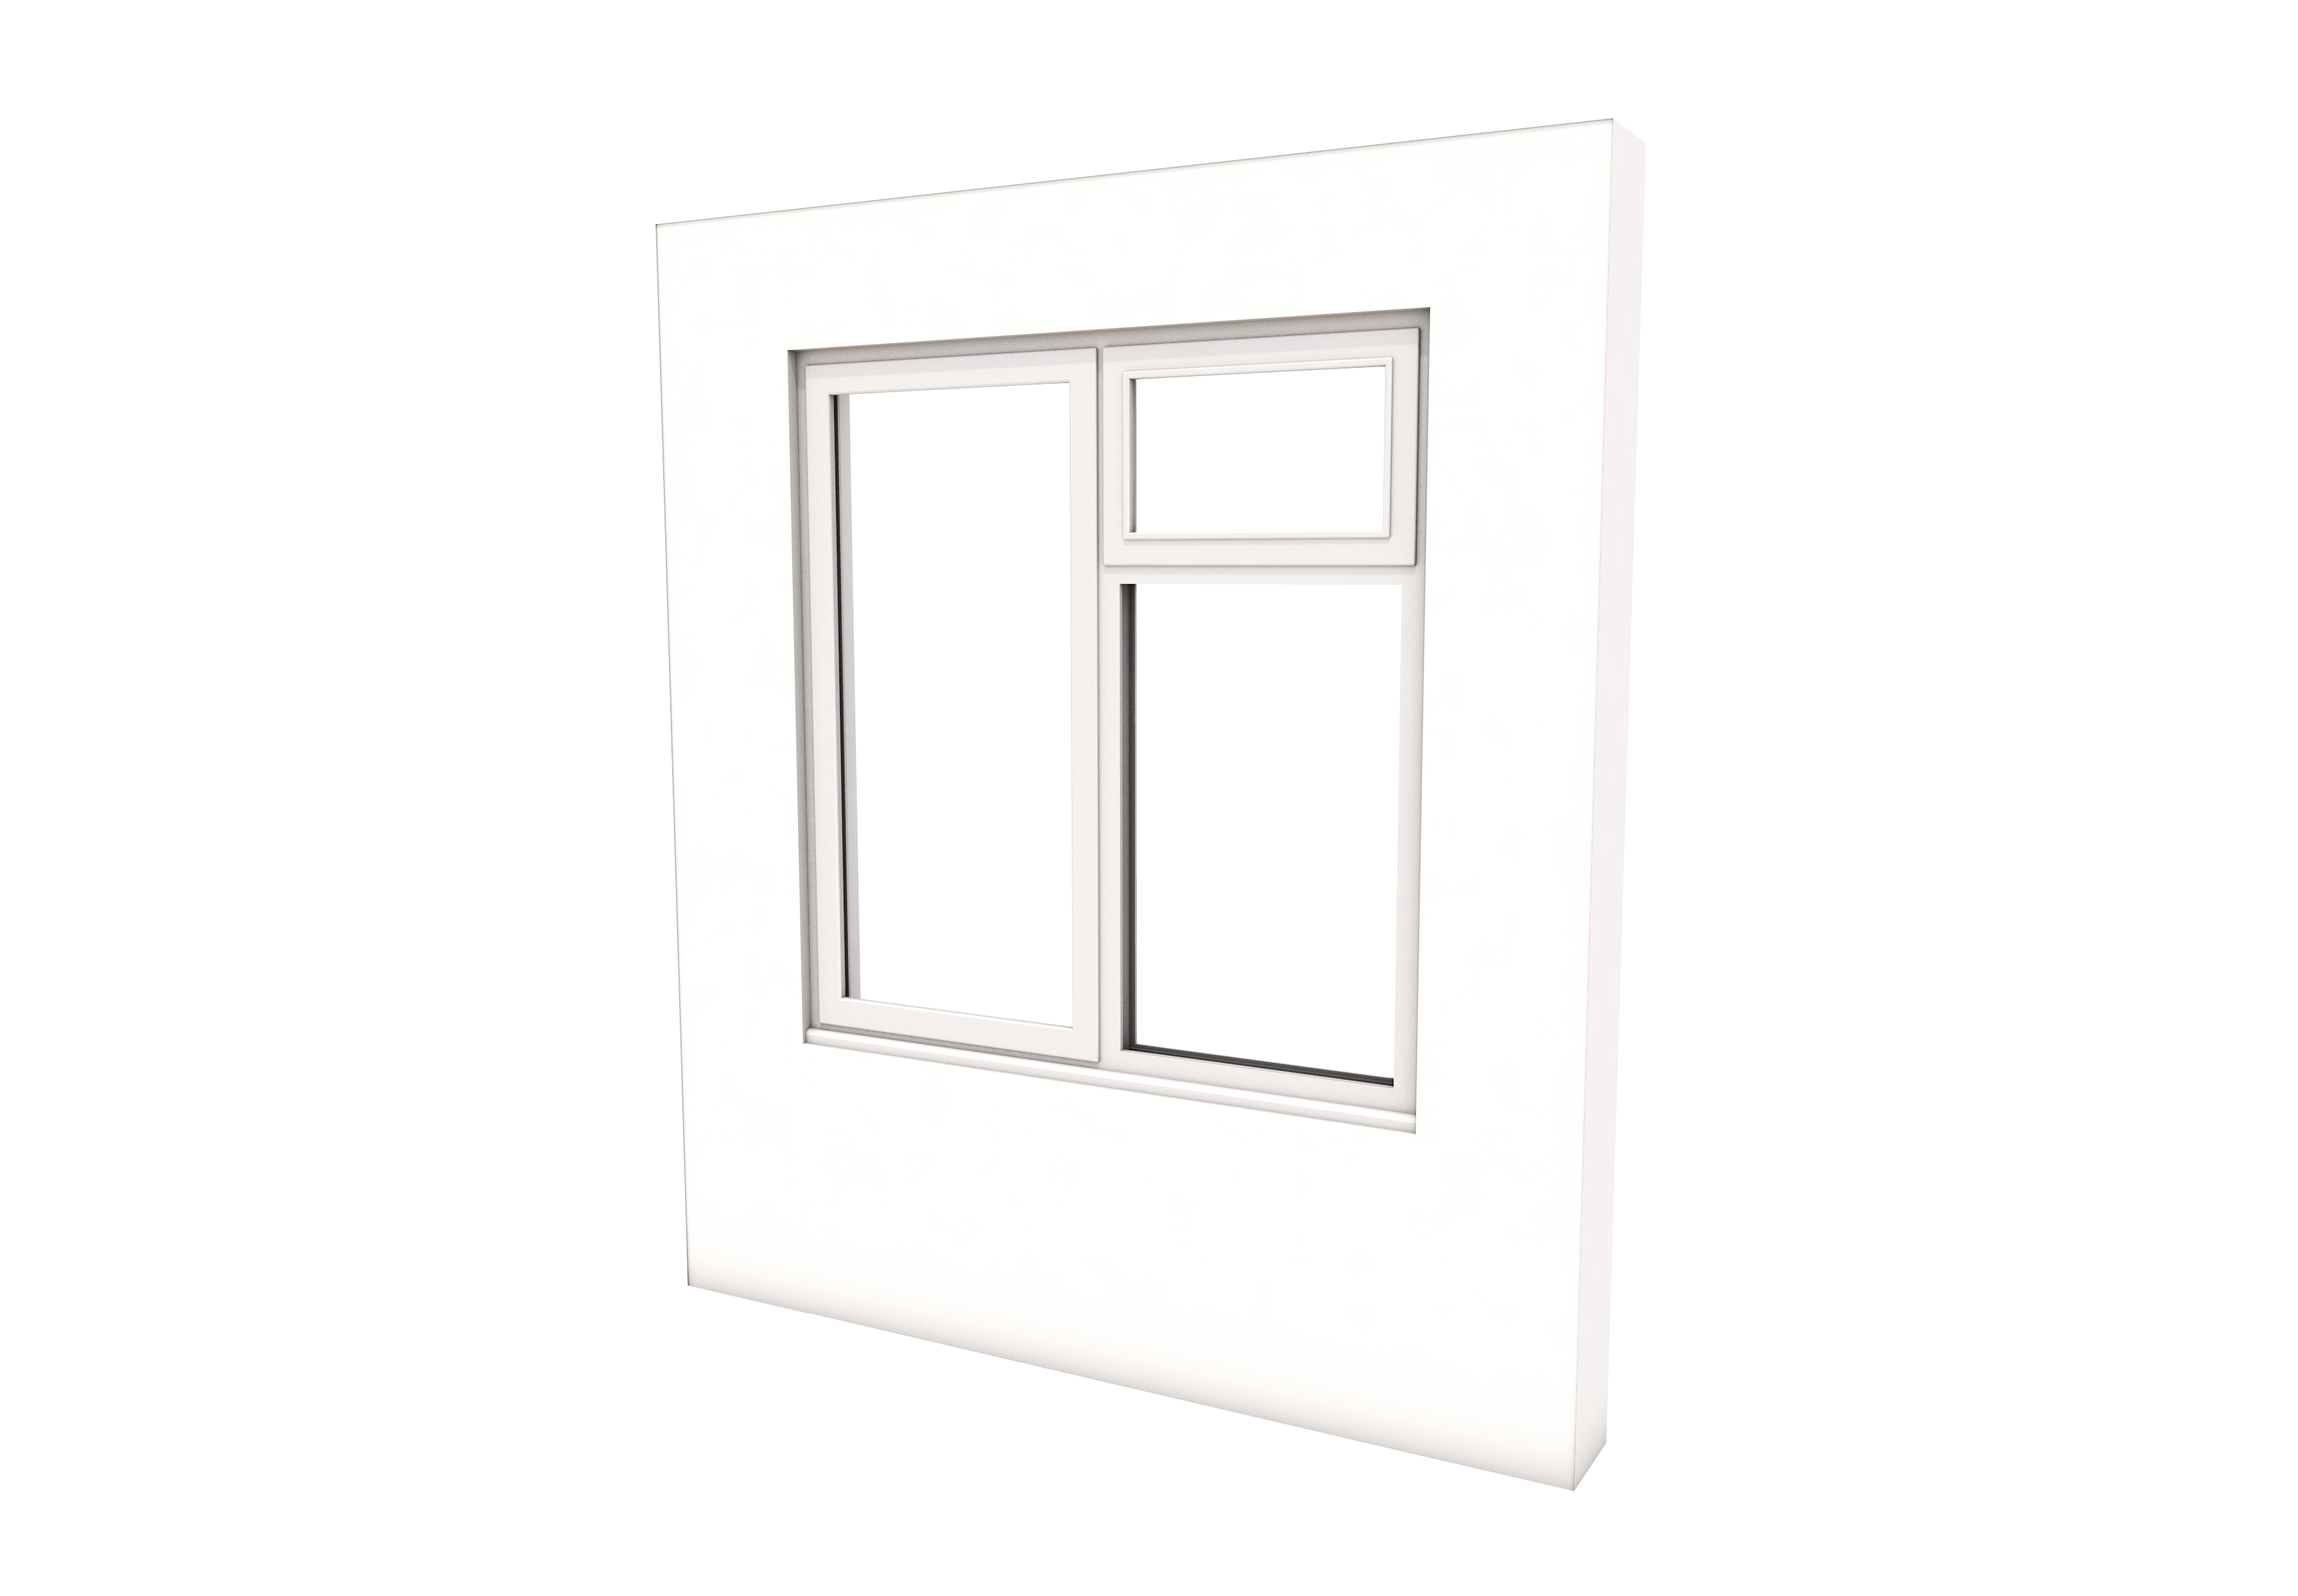 Smart Alitherm 300 Window - 1200 x 1200 mm - Right Bottom Fixed